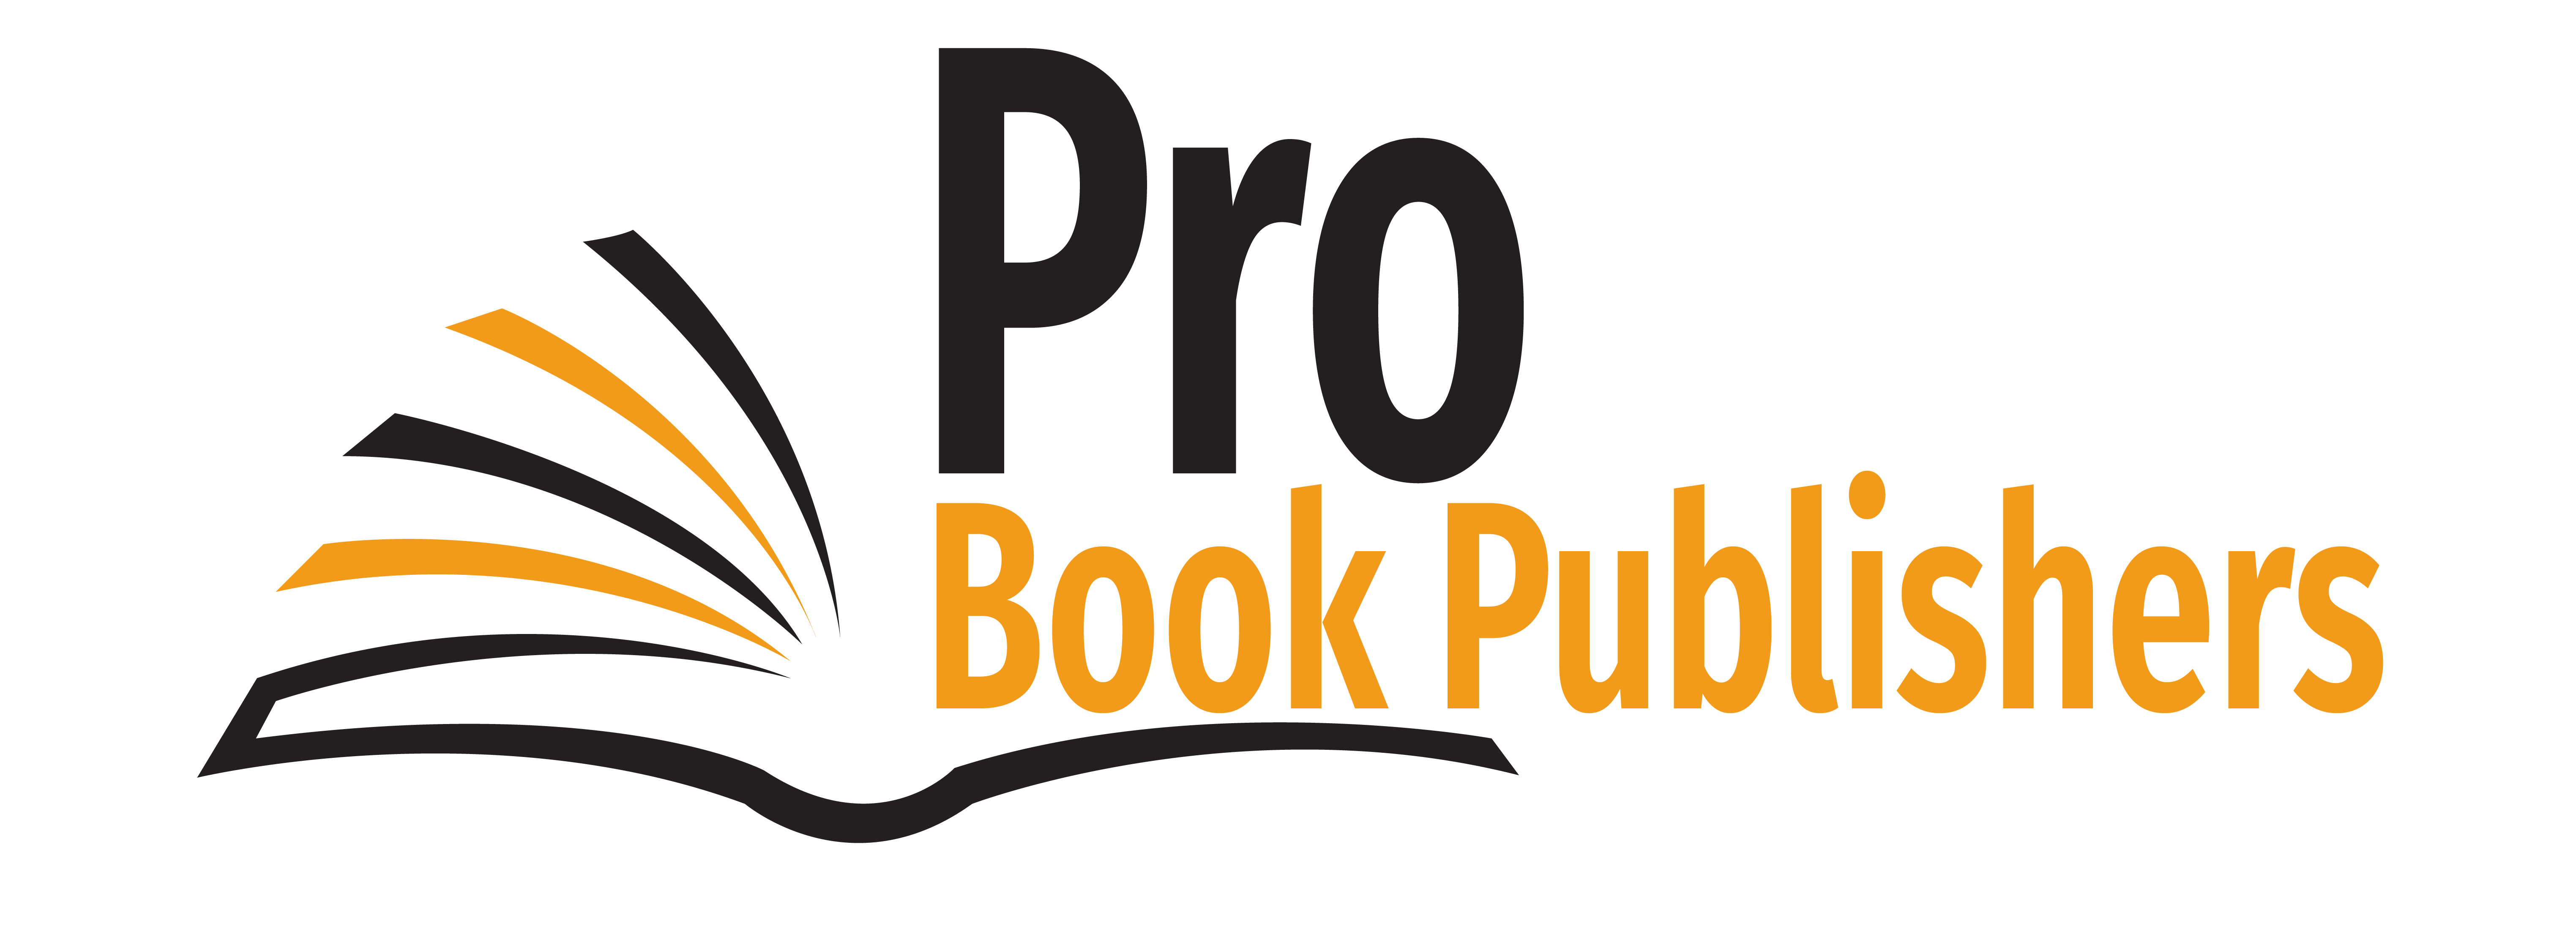 Pro Book Publisher